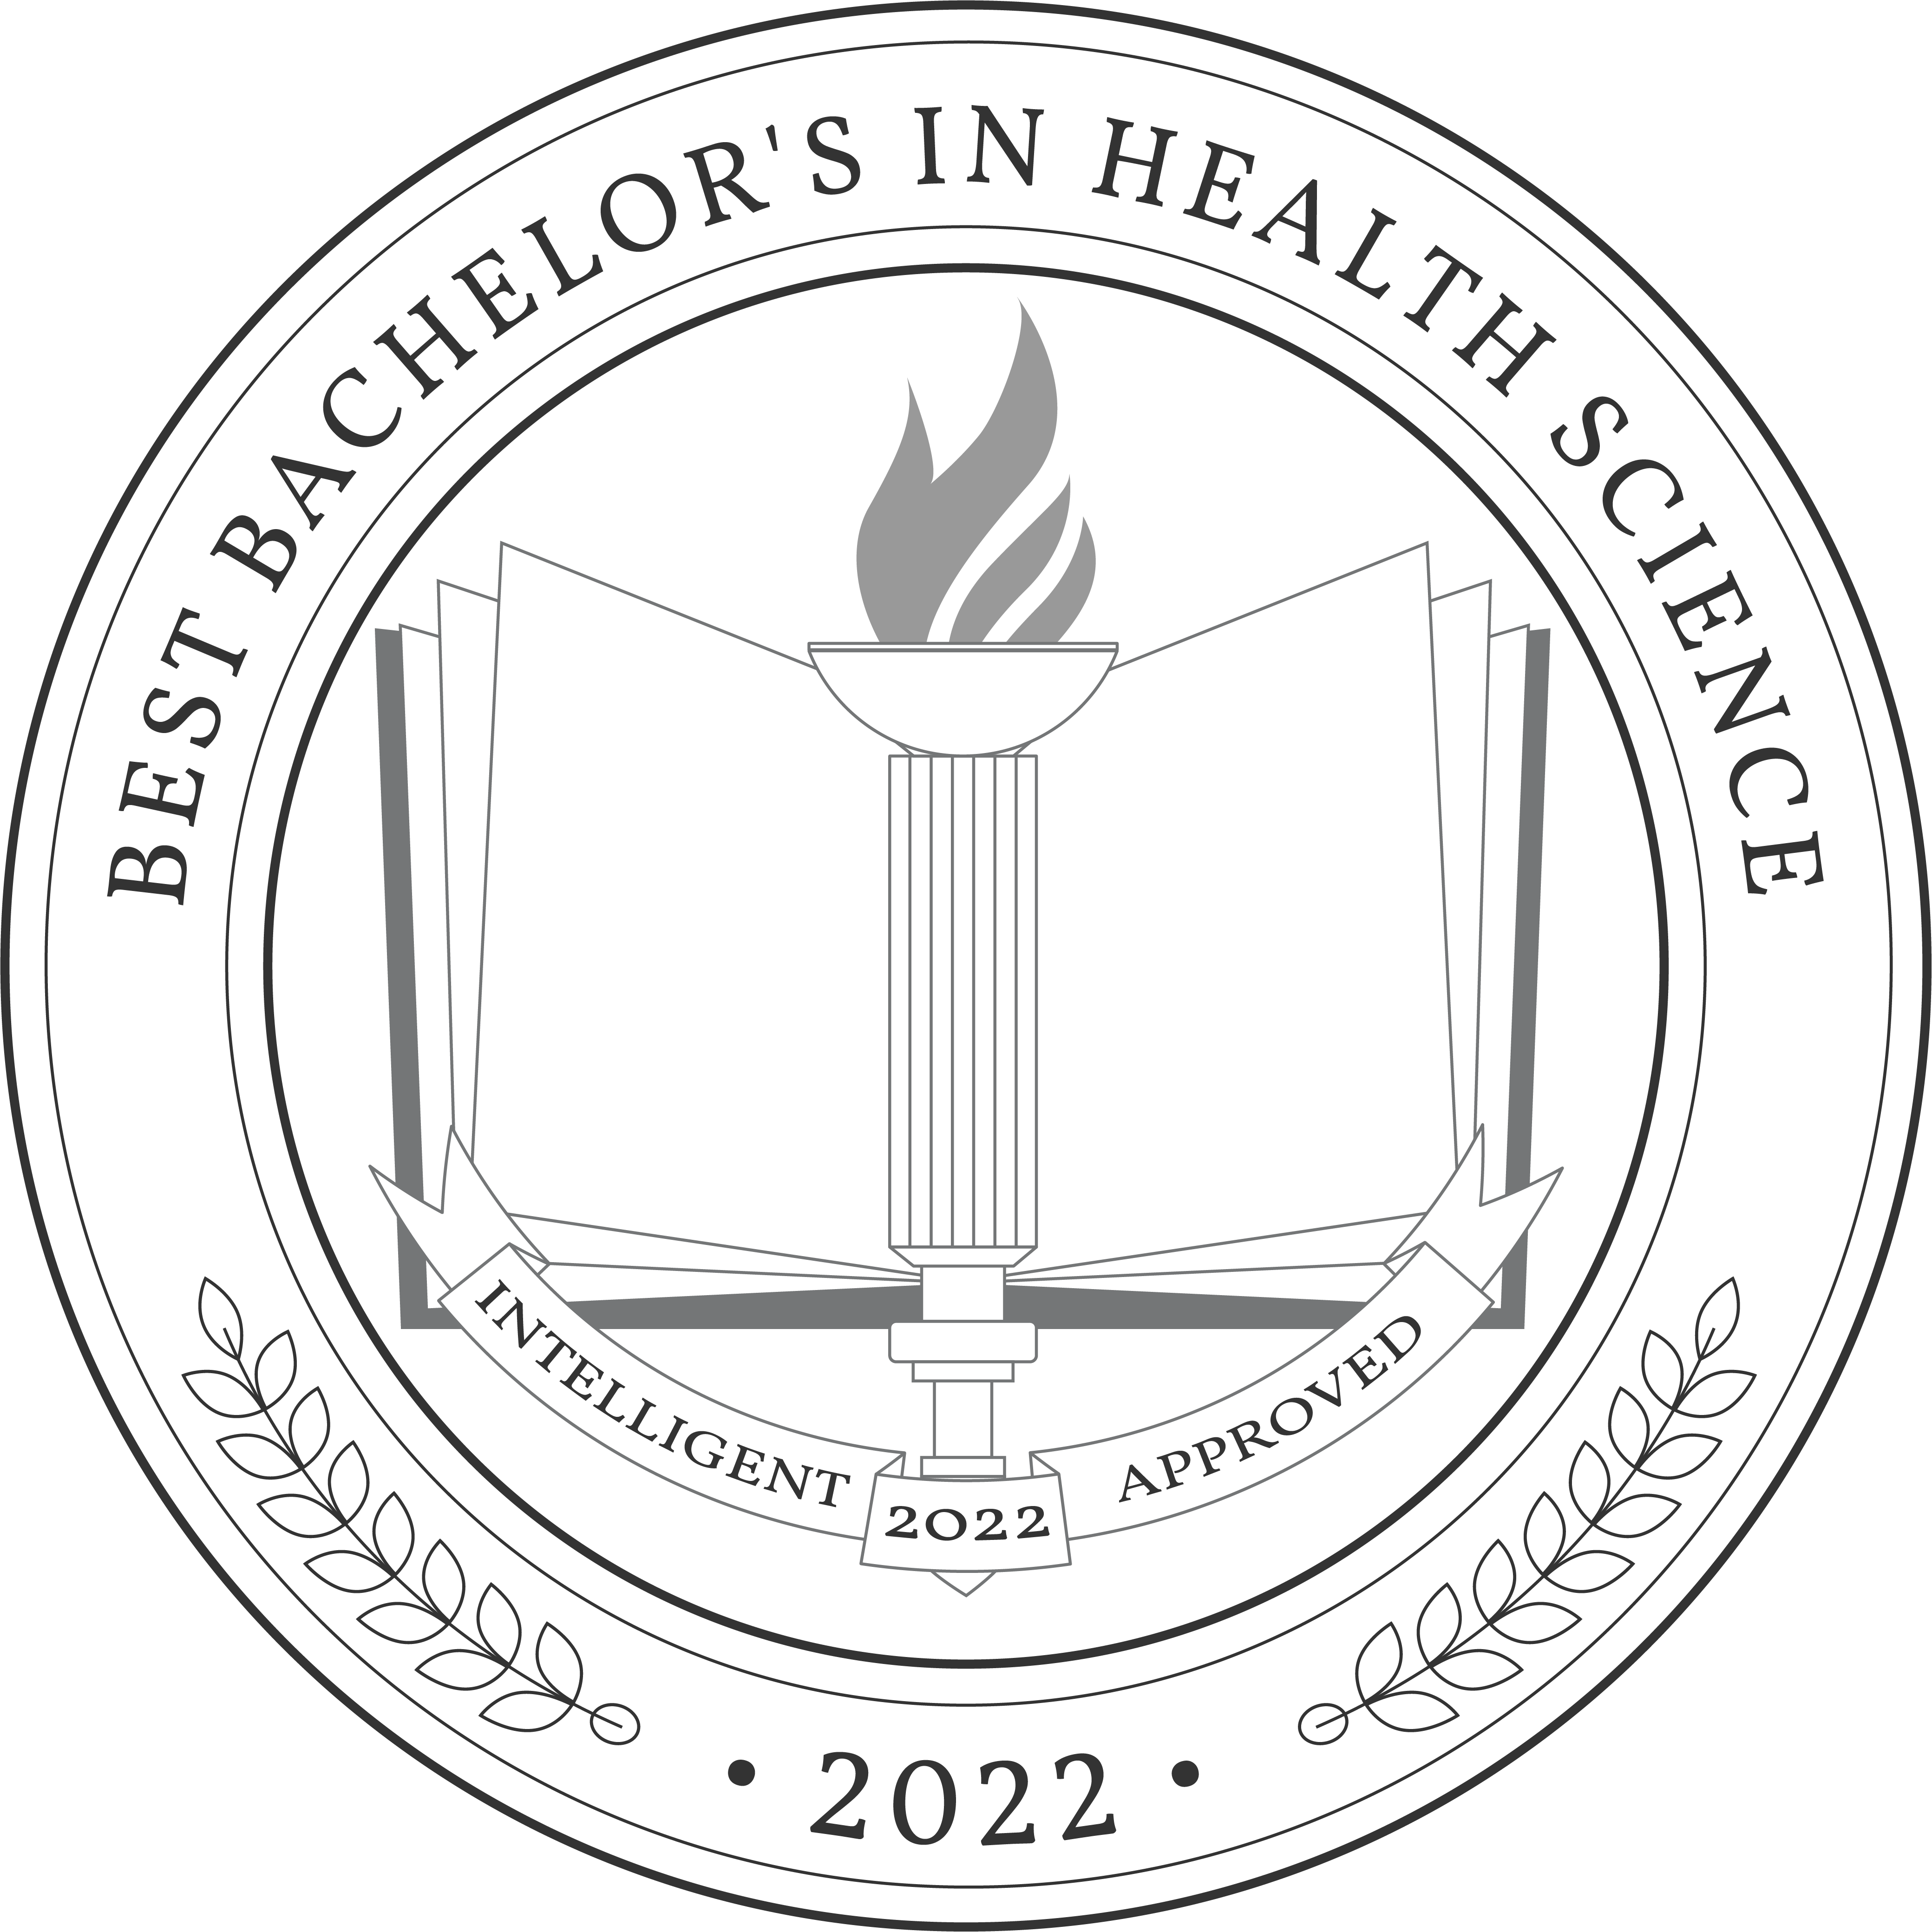 Best Bachelor's in Health Science Badge